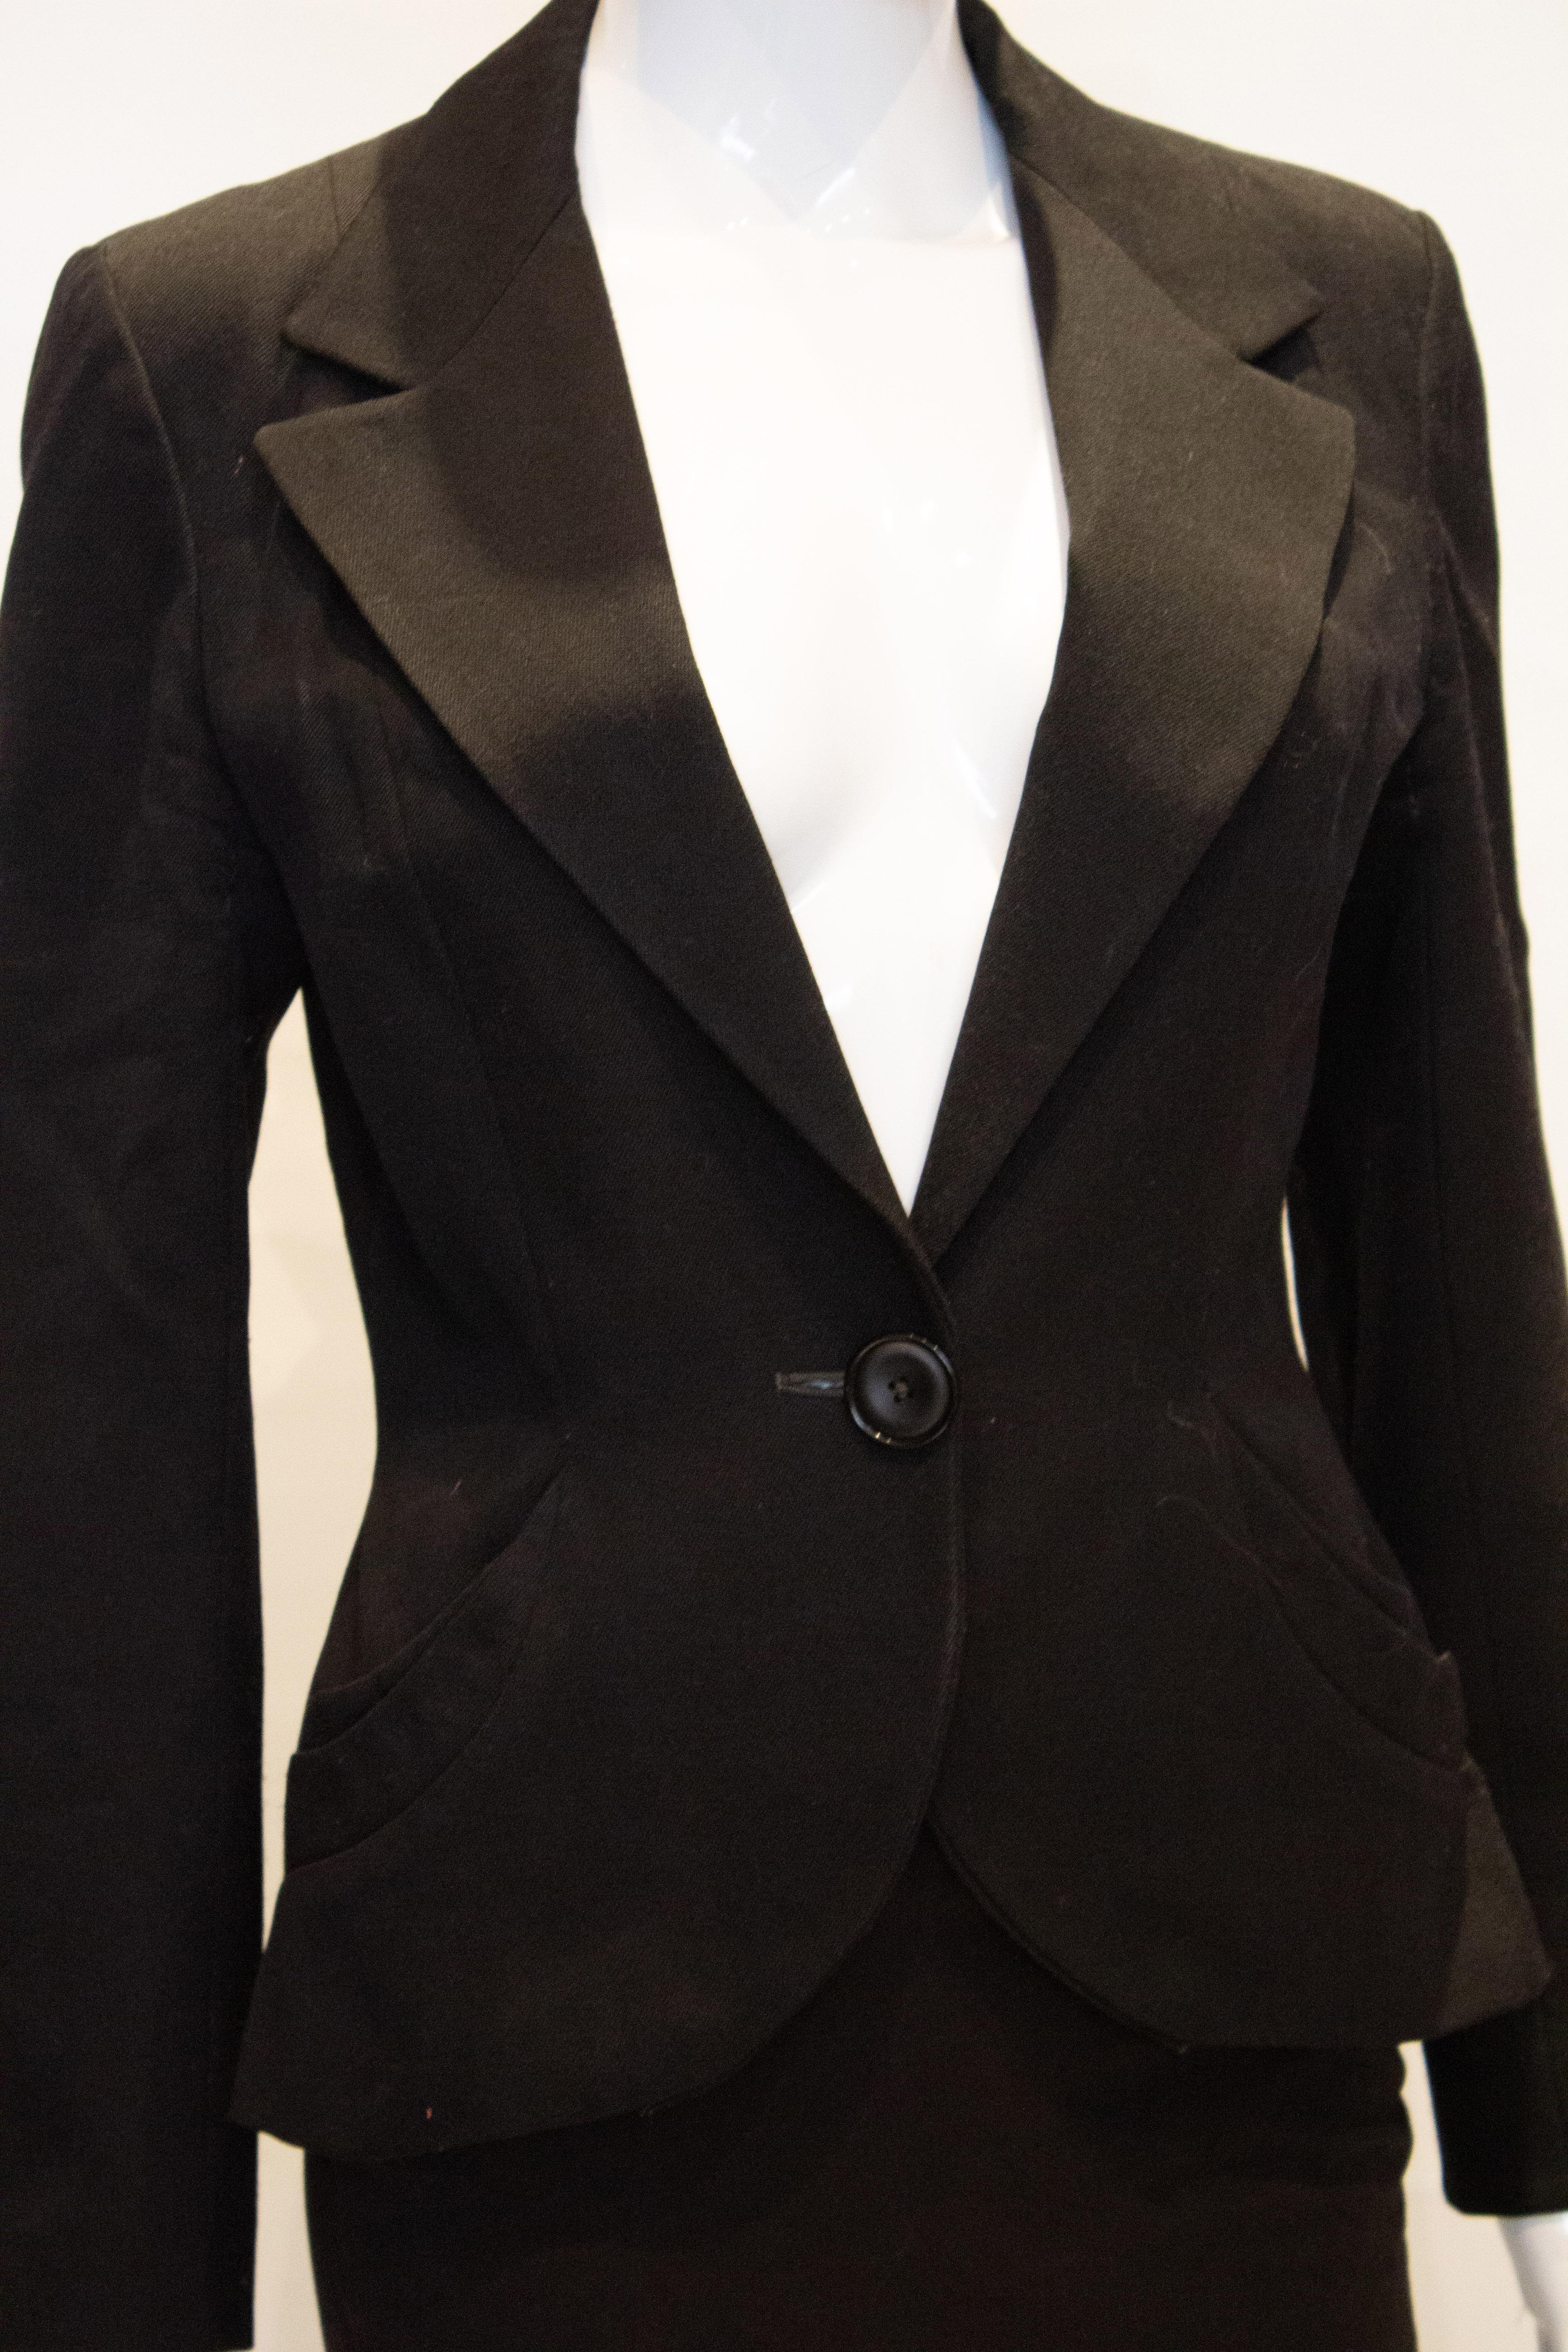 A great vintage jacket by Just Gordon. The jacket has a cut away collar and attractive pocket detail.